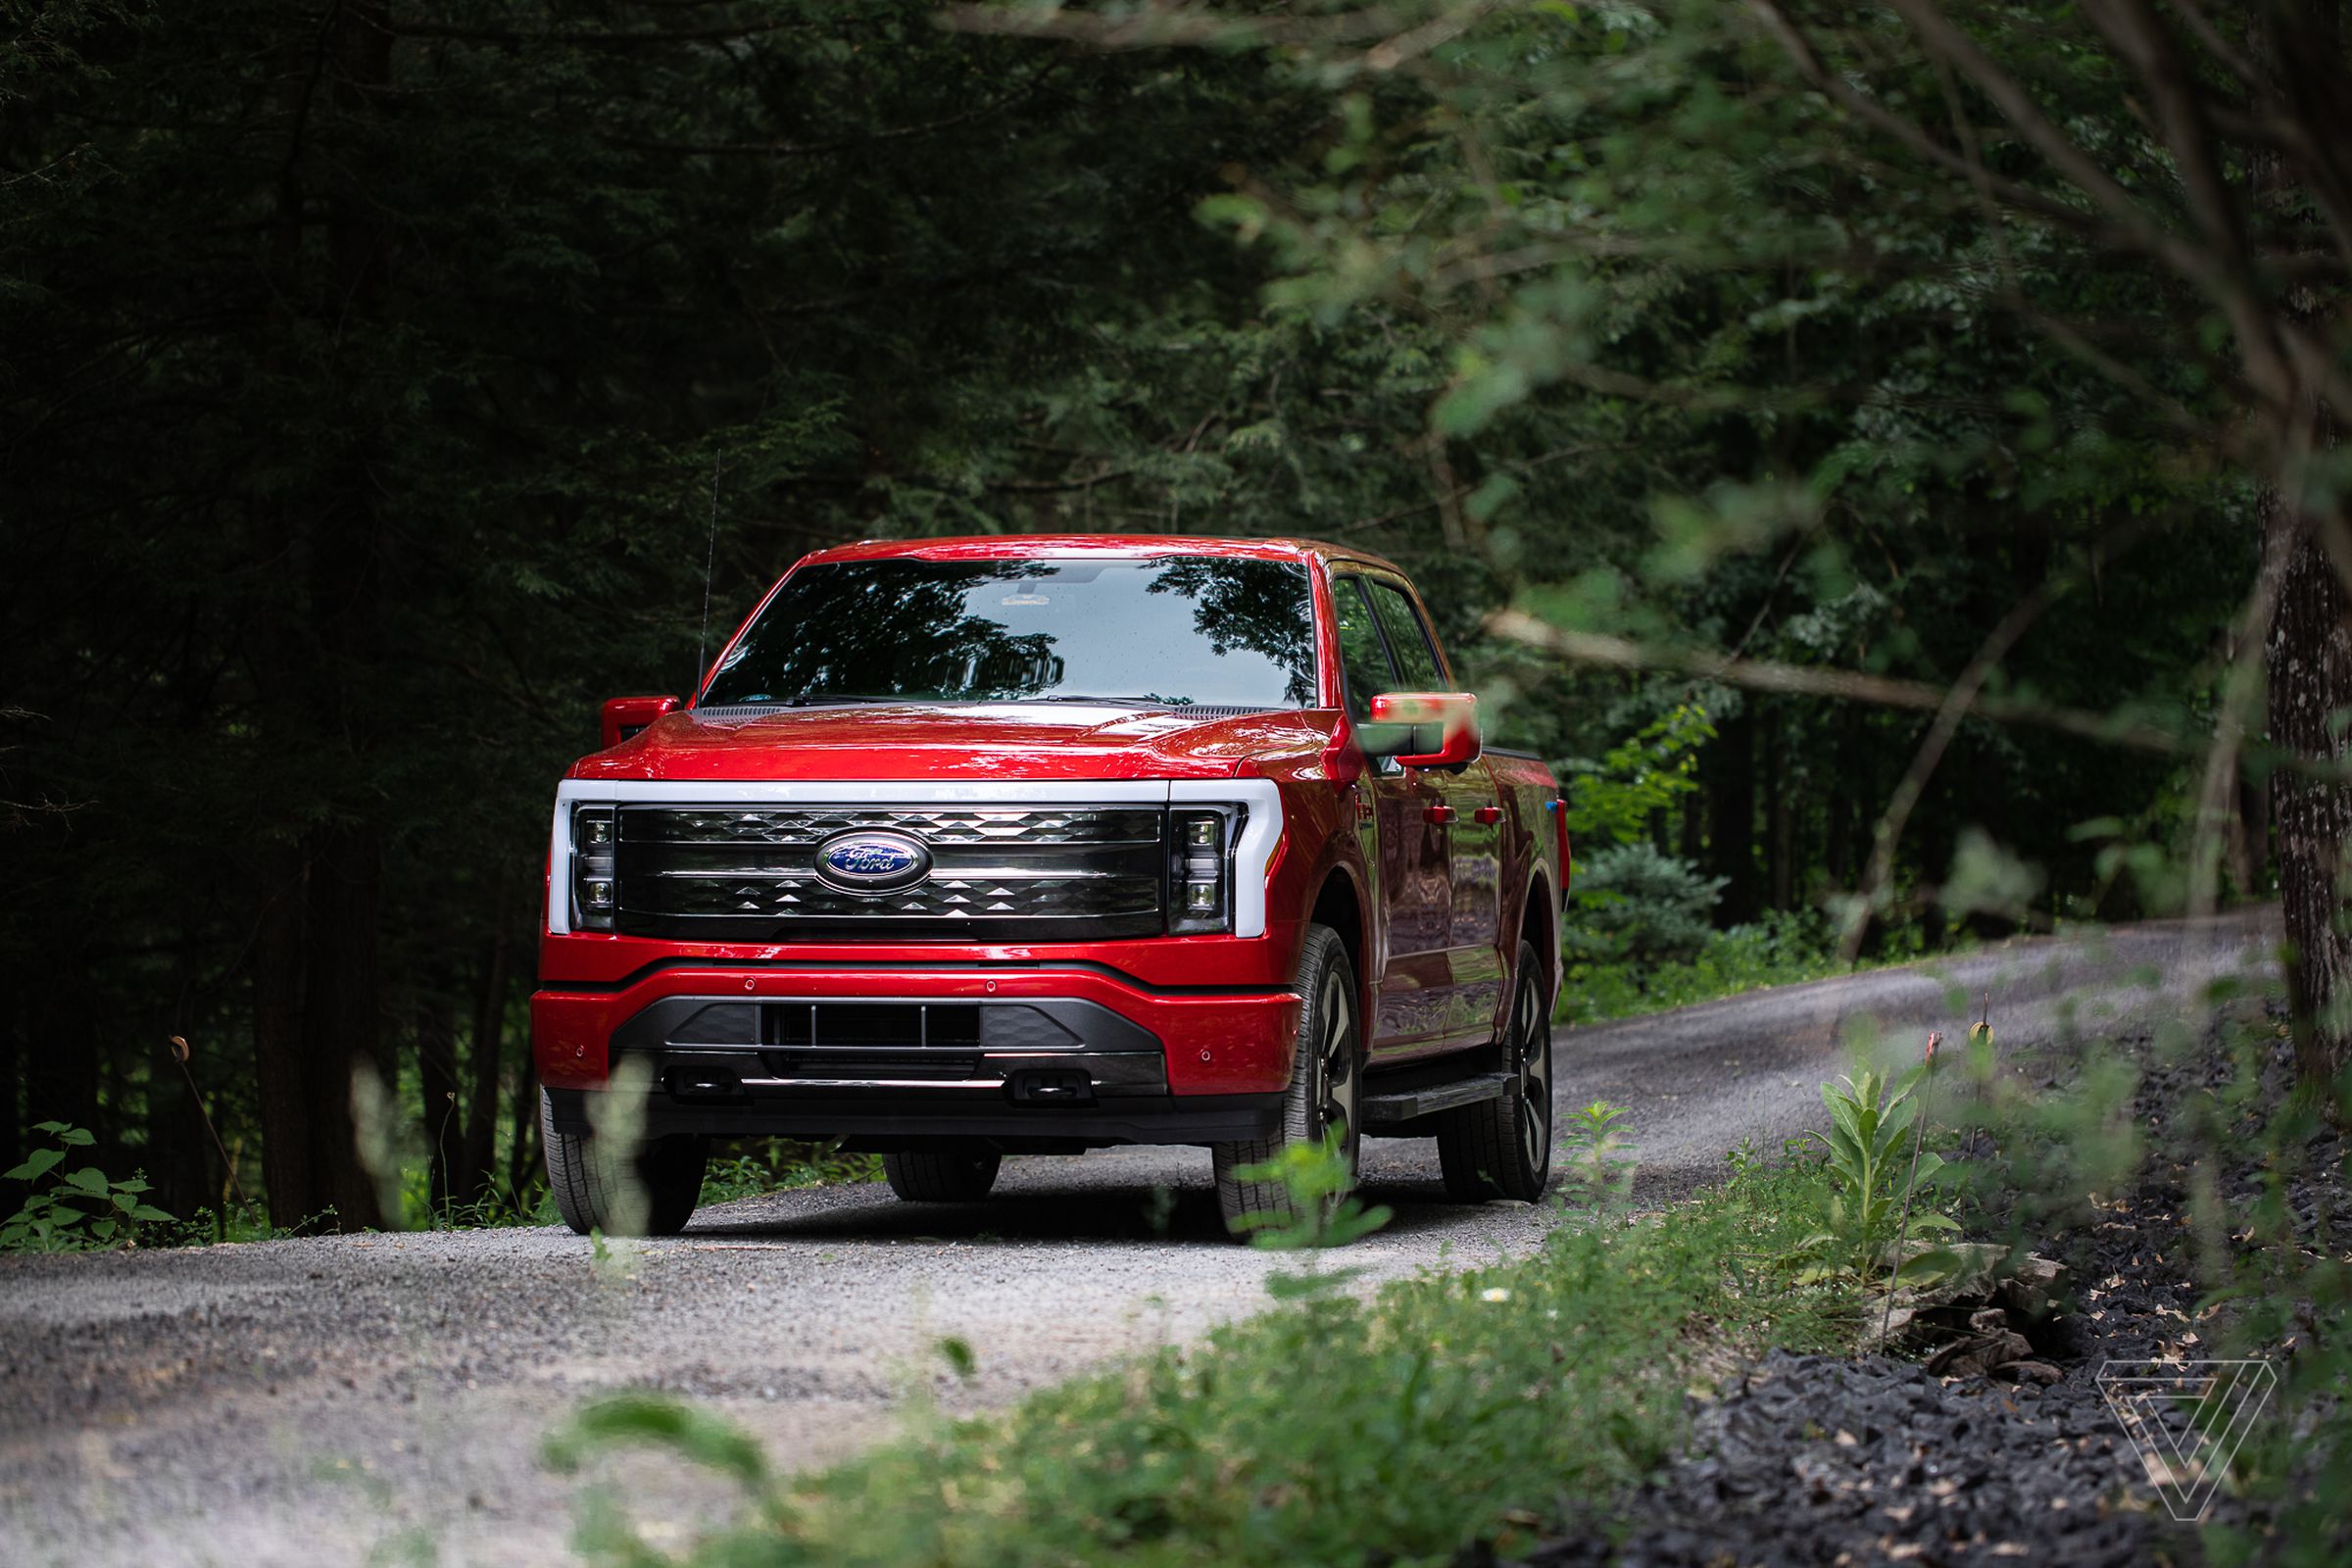 A red Ford F-150 Lightning electric truck on a road